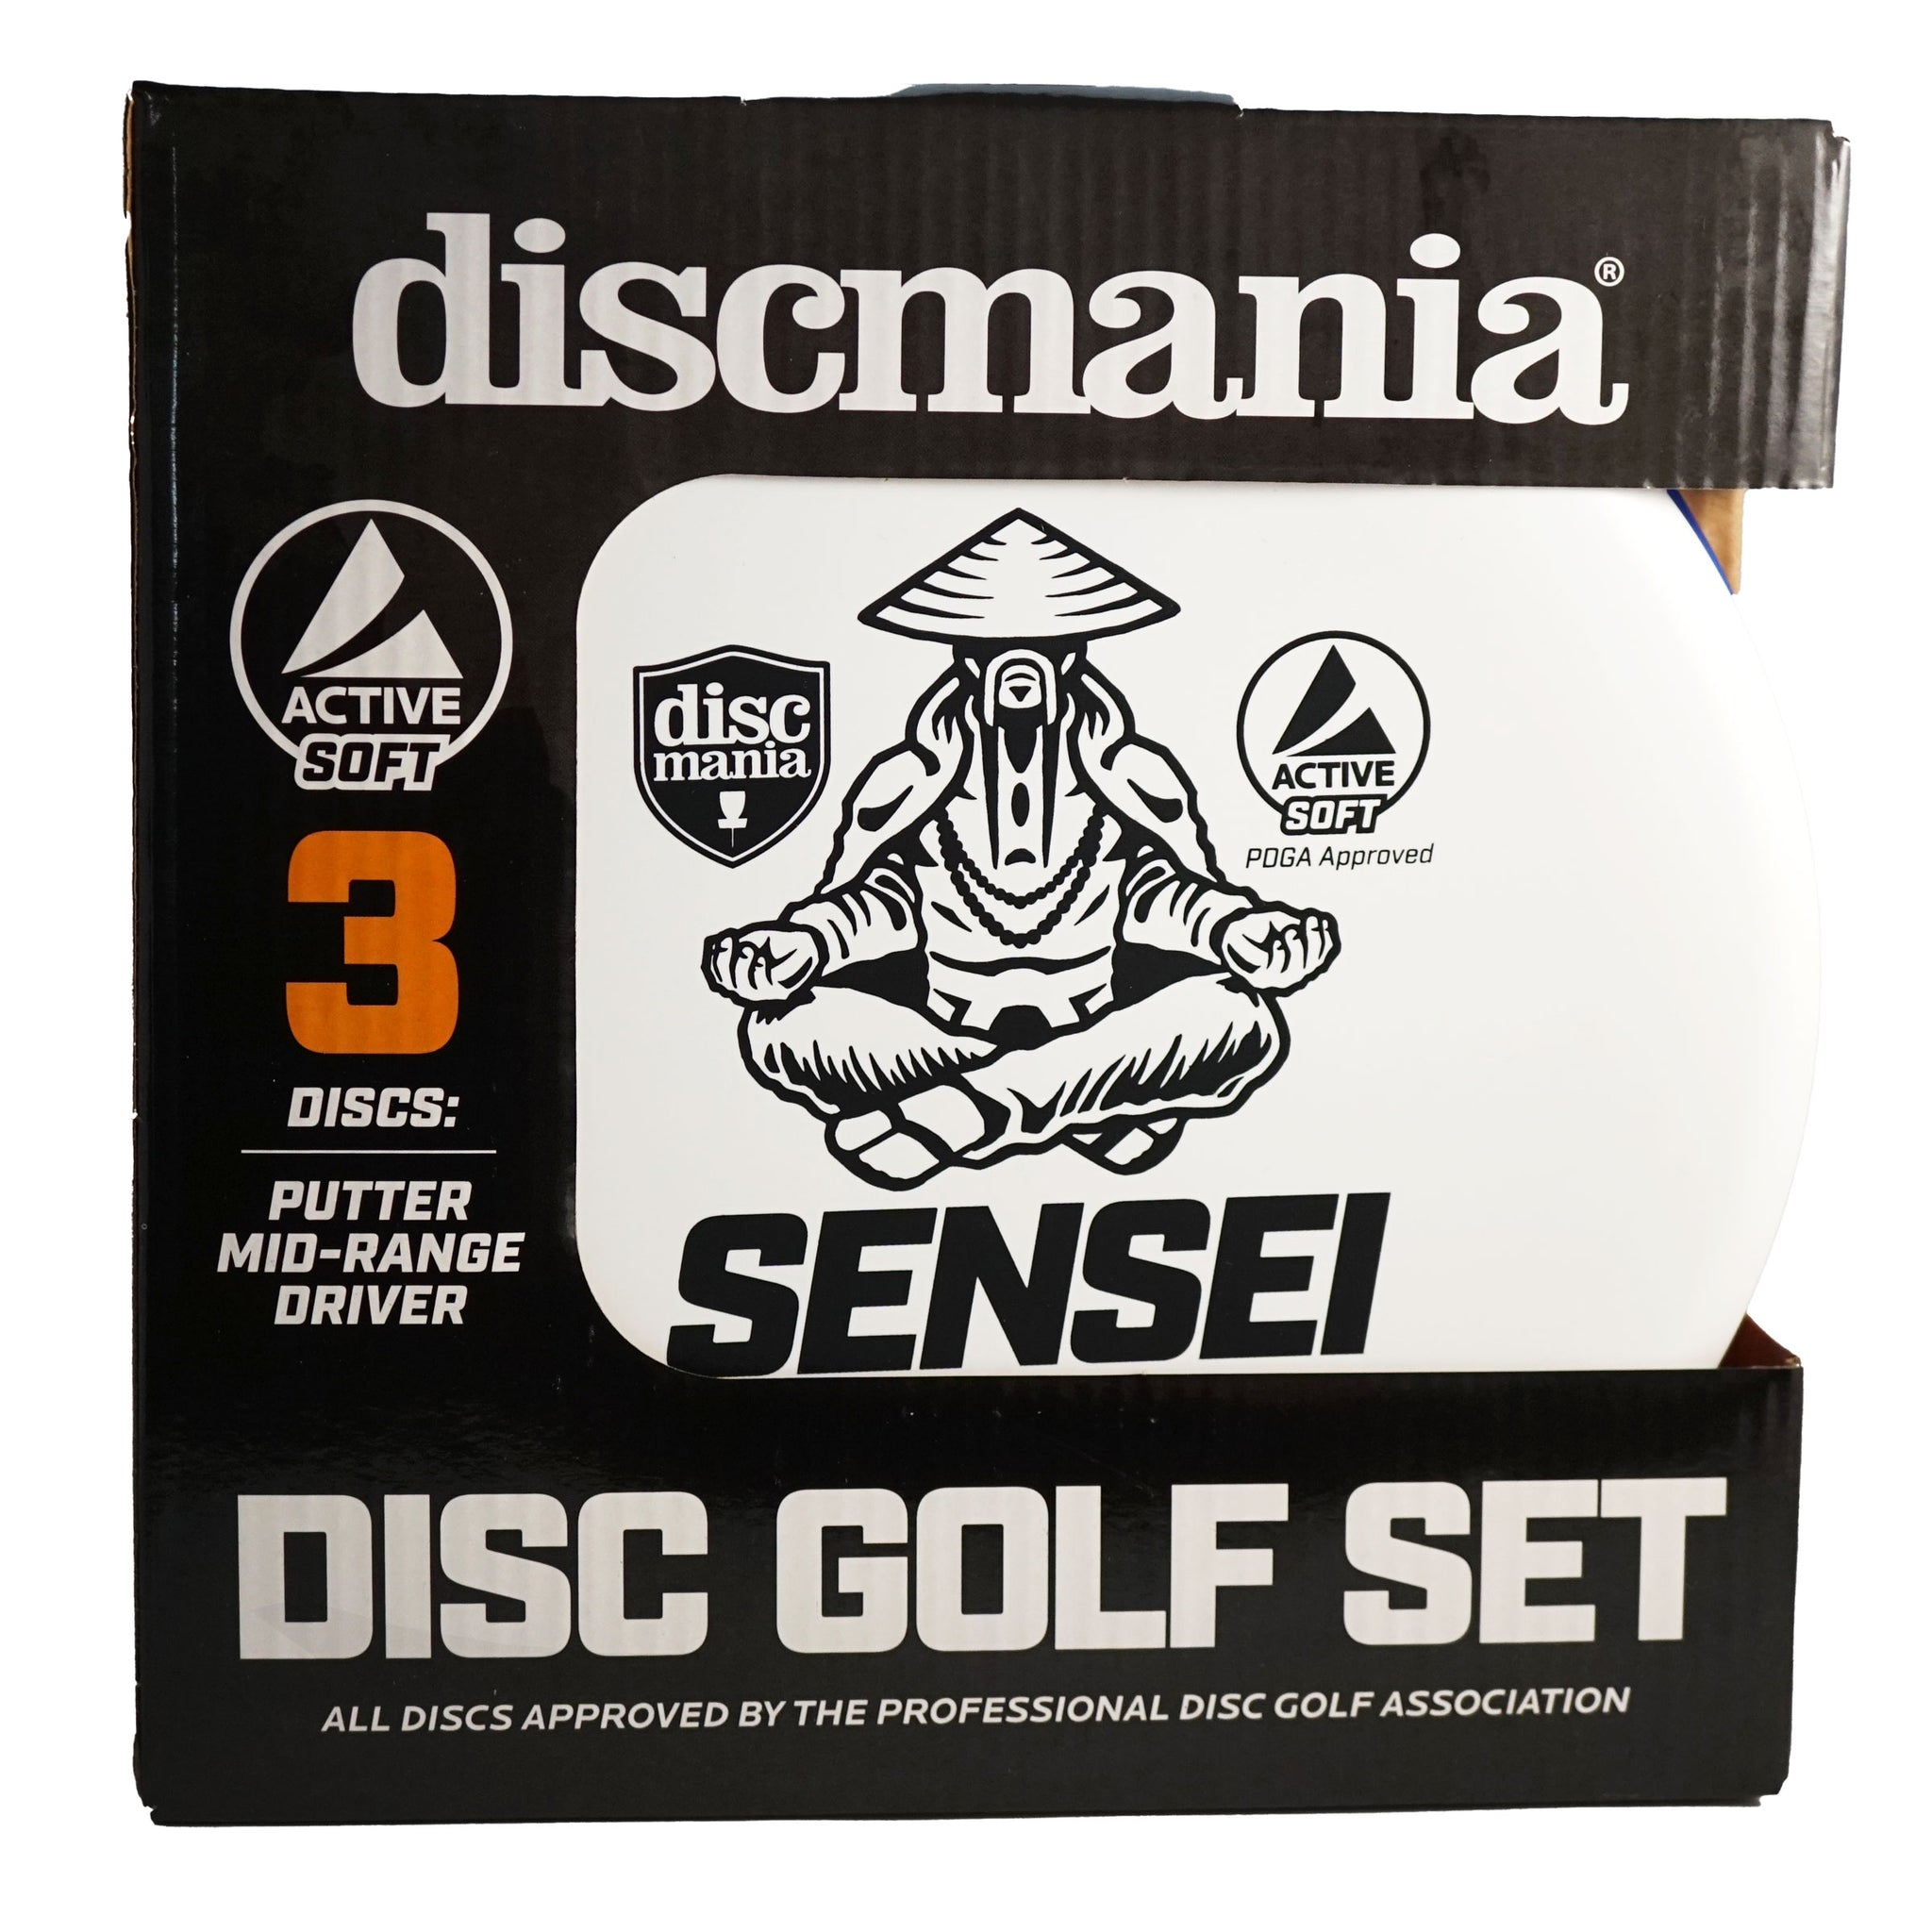 Just getting into this beautiful game you all call DISC Golf. Rate